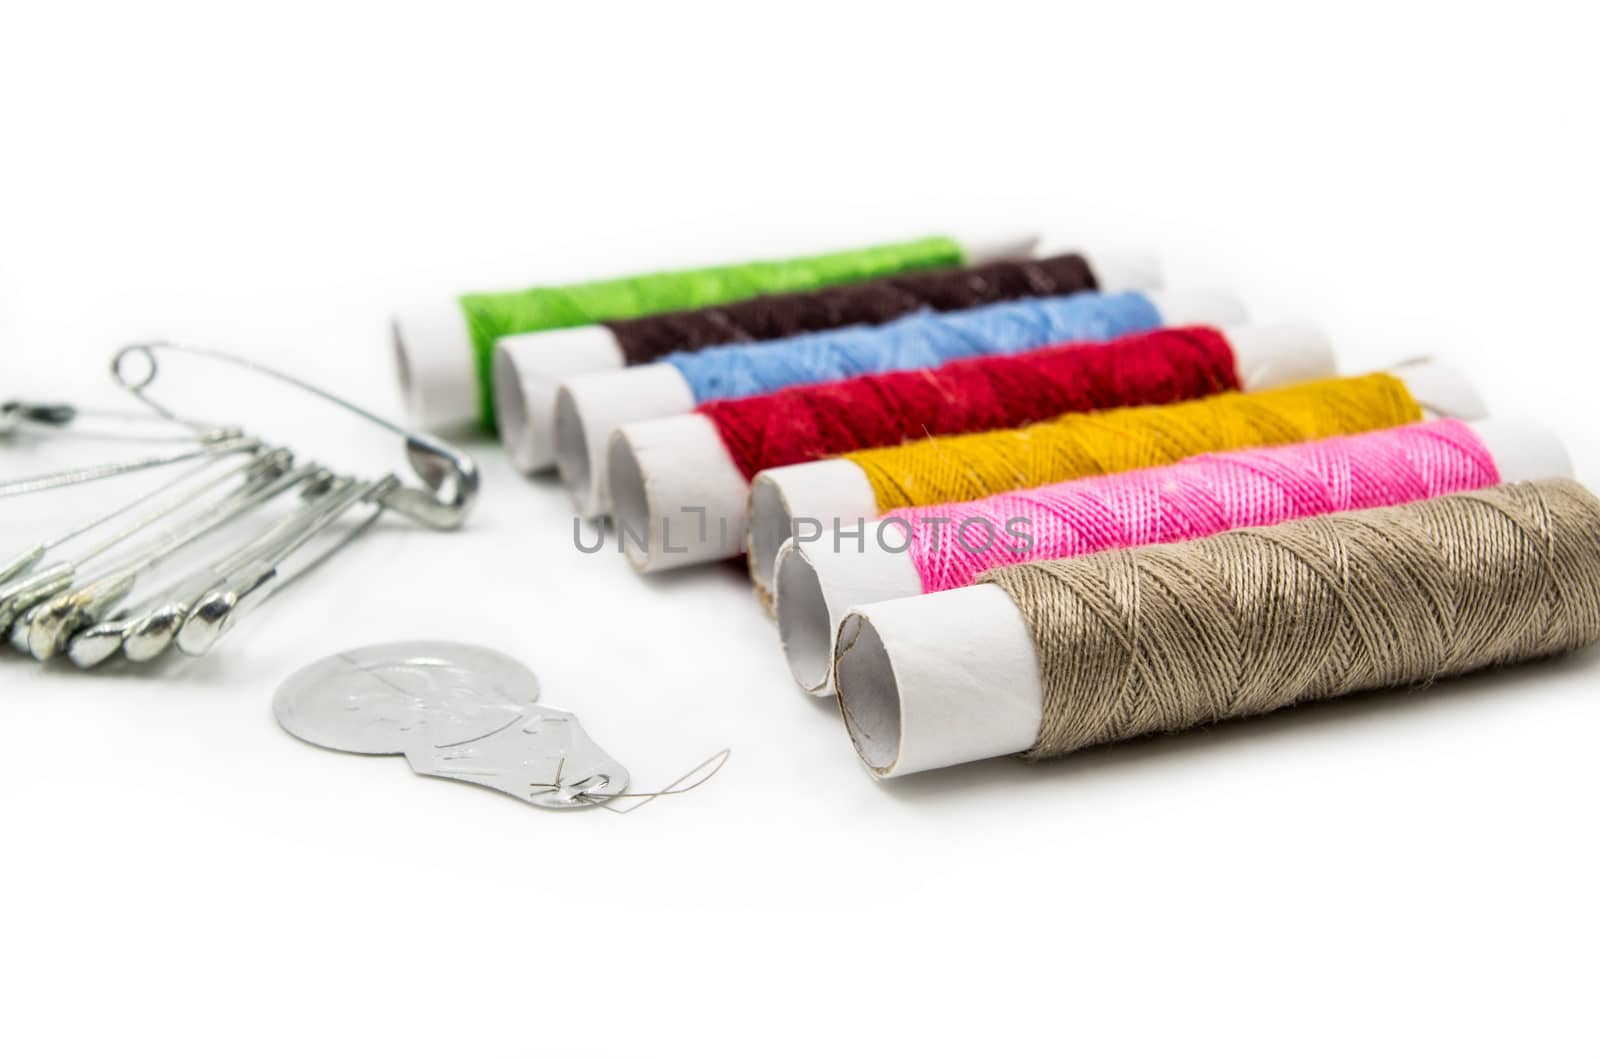 sewing tools and pins on the white background